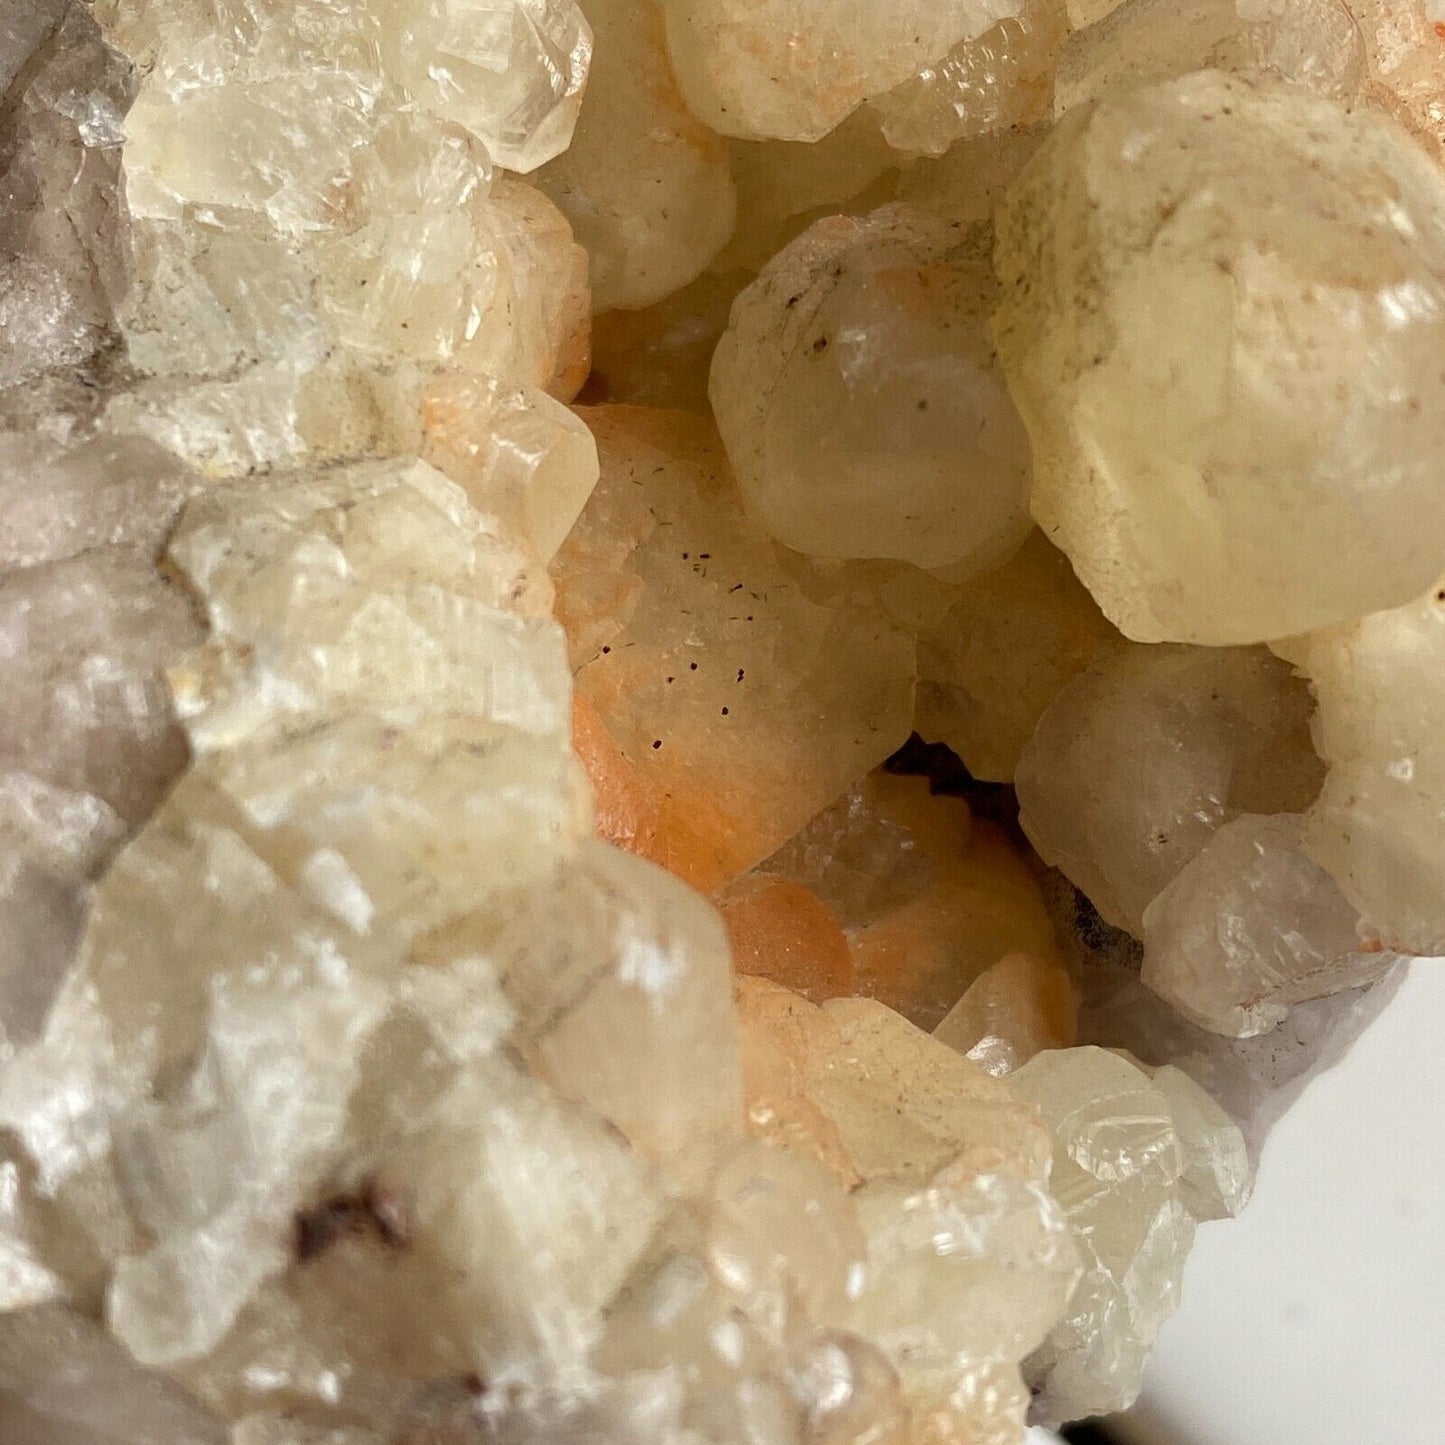 CALCITE AND QUARTZ  FROM DULCOTE THE MENDIPS SOMERSET 283g MF110